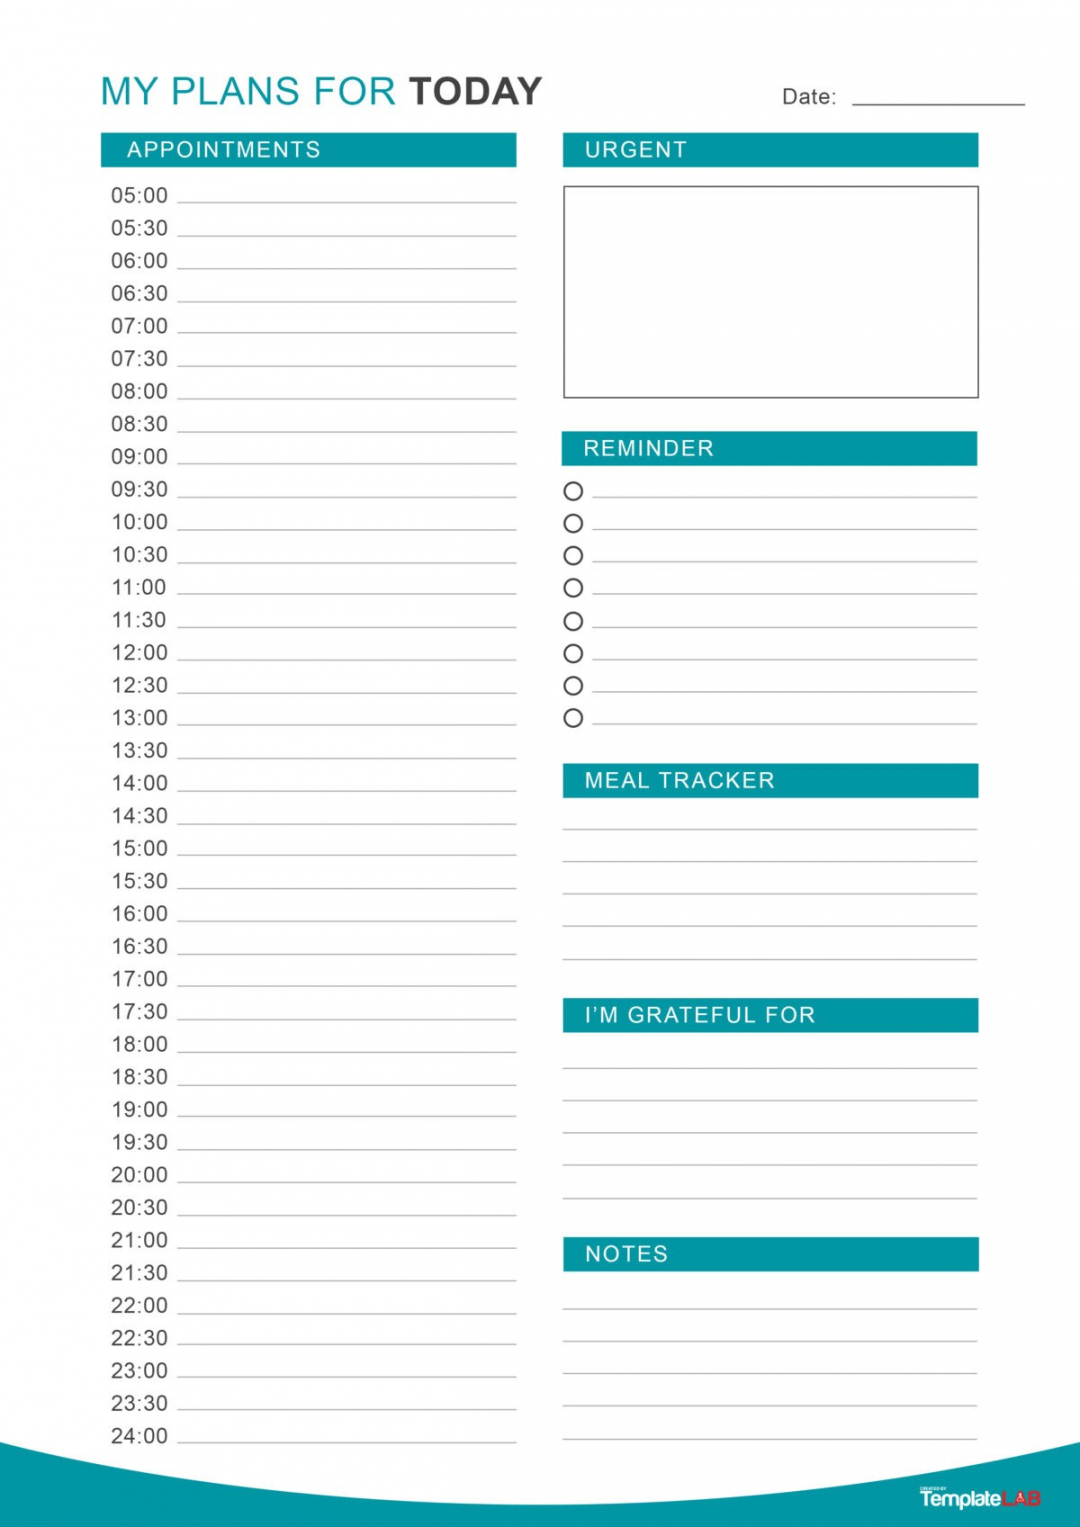 Free Printable Daily Calendar - Printable -  Printable Daily Planner Templates (FREE in Word/Excel/PDF)